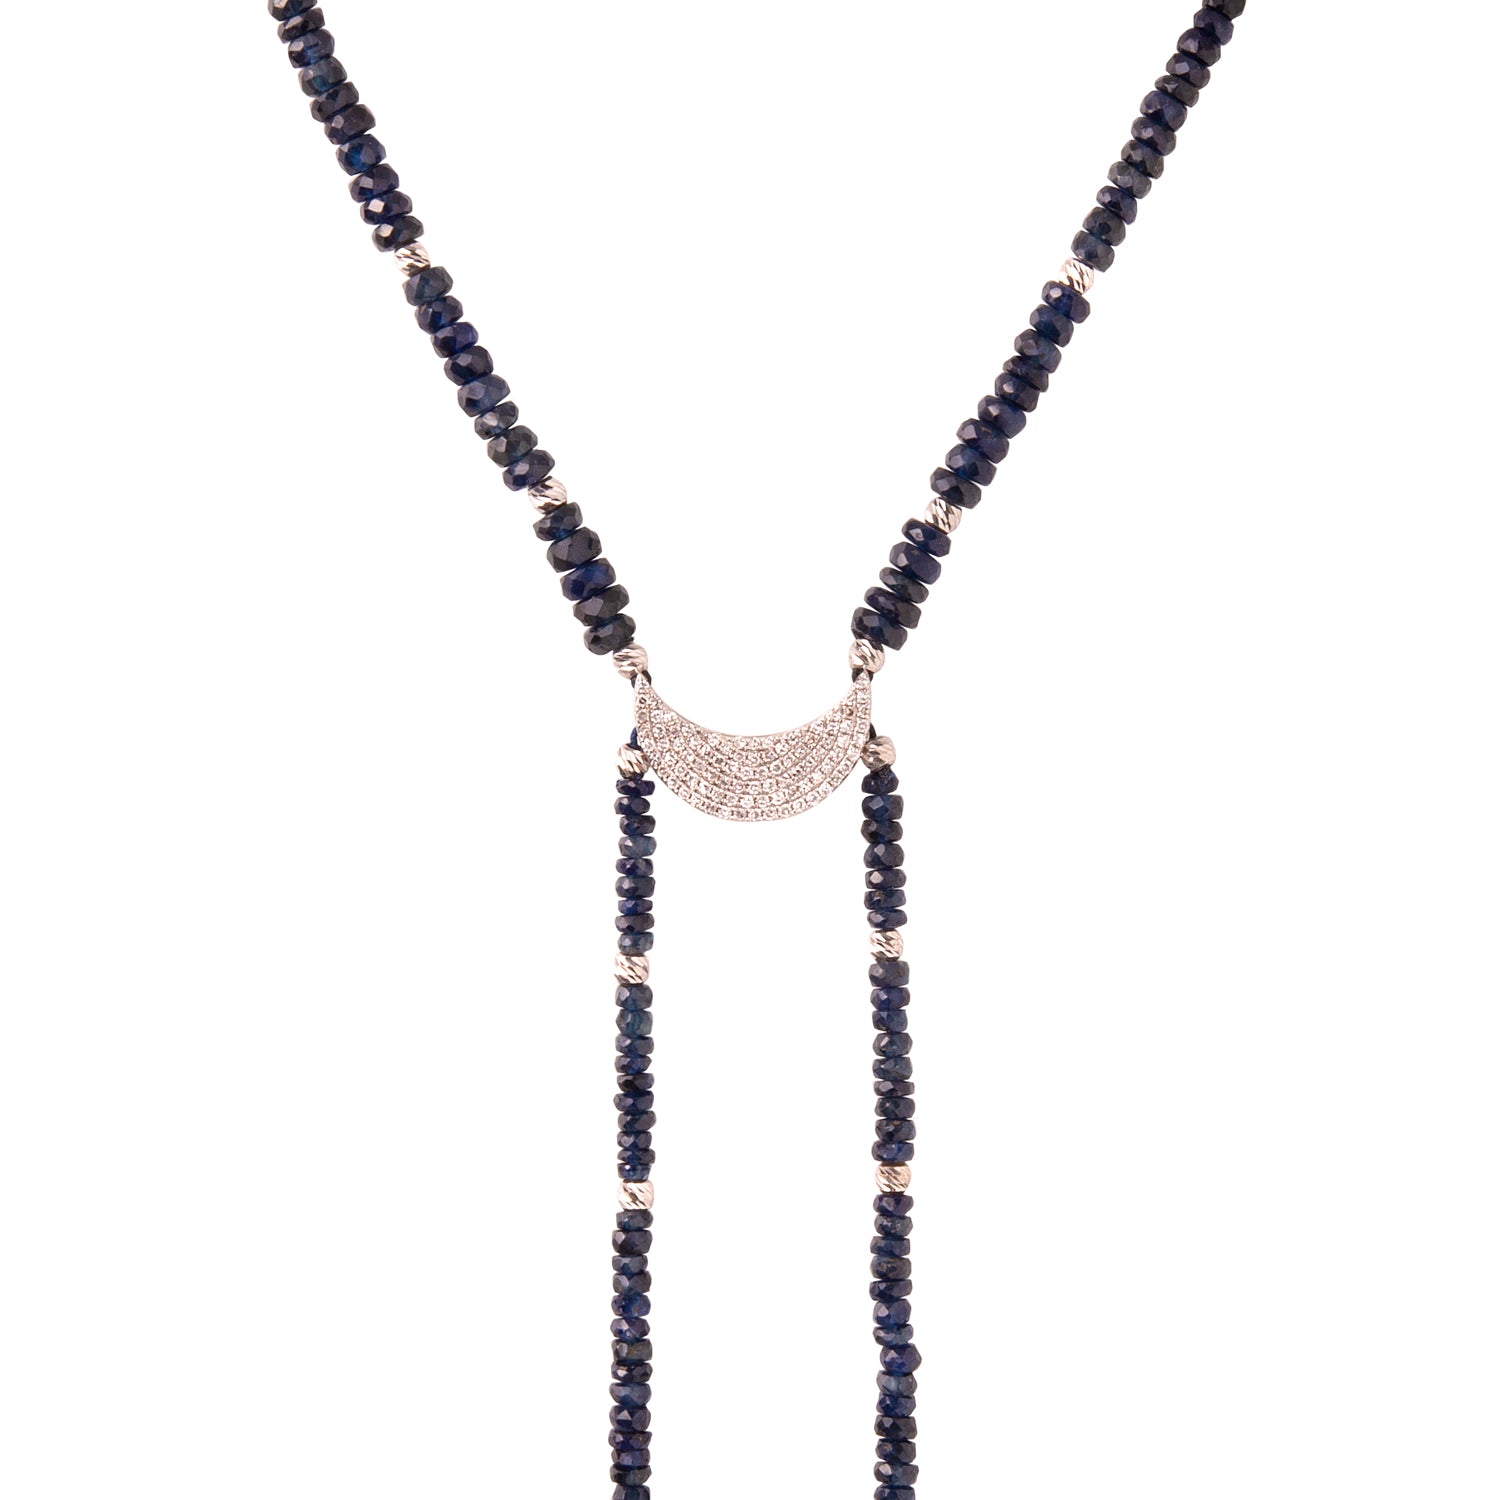 Symbol necklace. Diamond moon necklace. Gift necklace. Gold necklace. Diamond necklace. Precious stone necklace. Evil Eye necklace. Rose gold necklace. Chain necklace. Easy to wear necklace. Anatol jewelry. Fine jewelry. Golden Hall. Kifissia. Sapphire necklace. Sapphire beads.